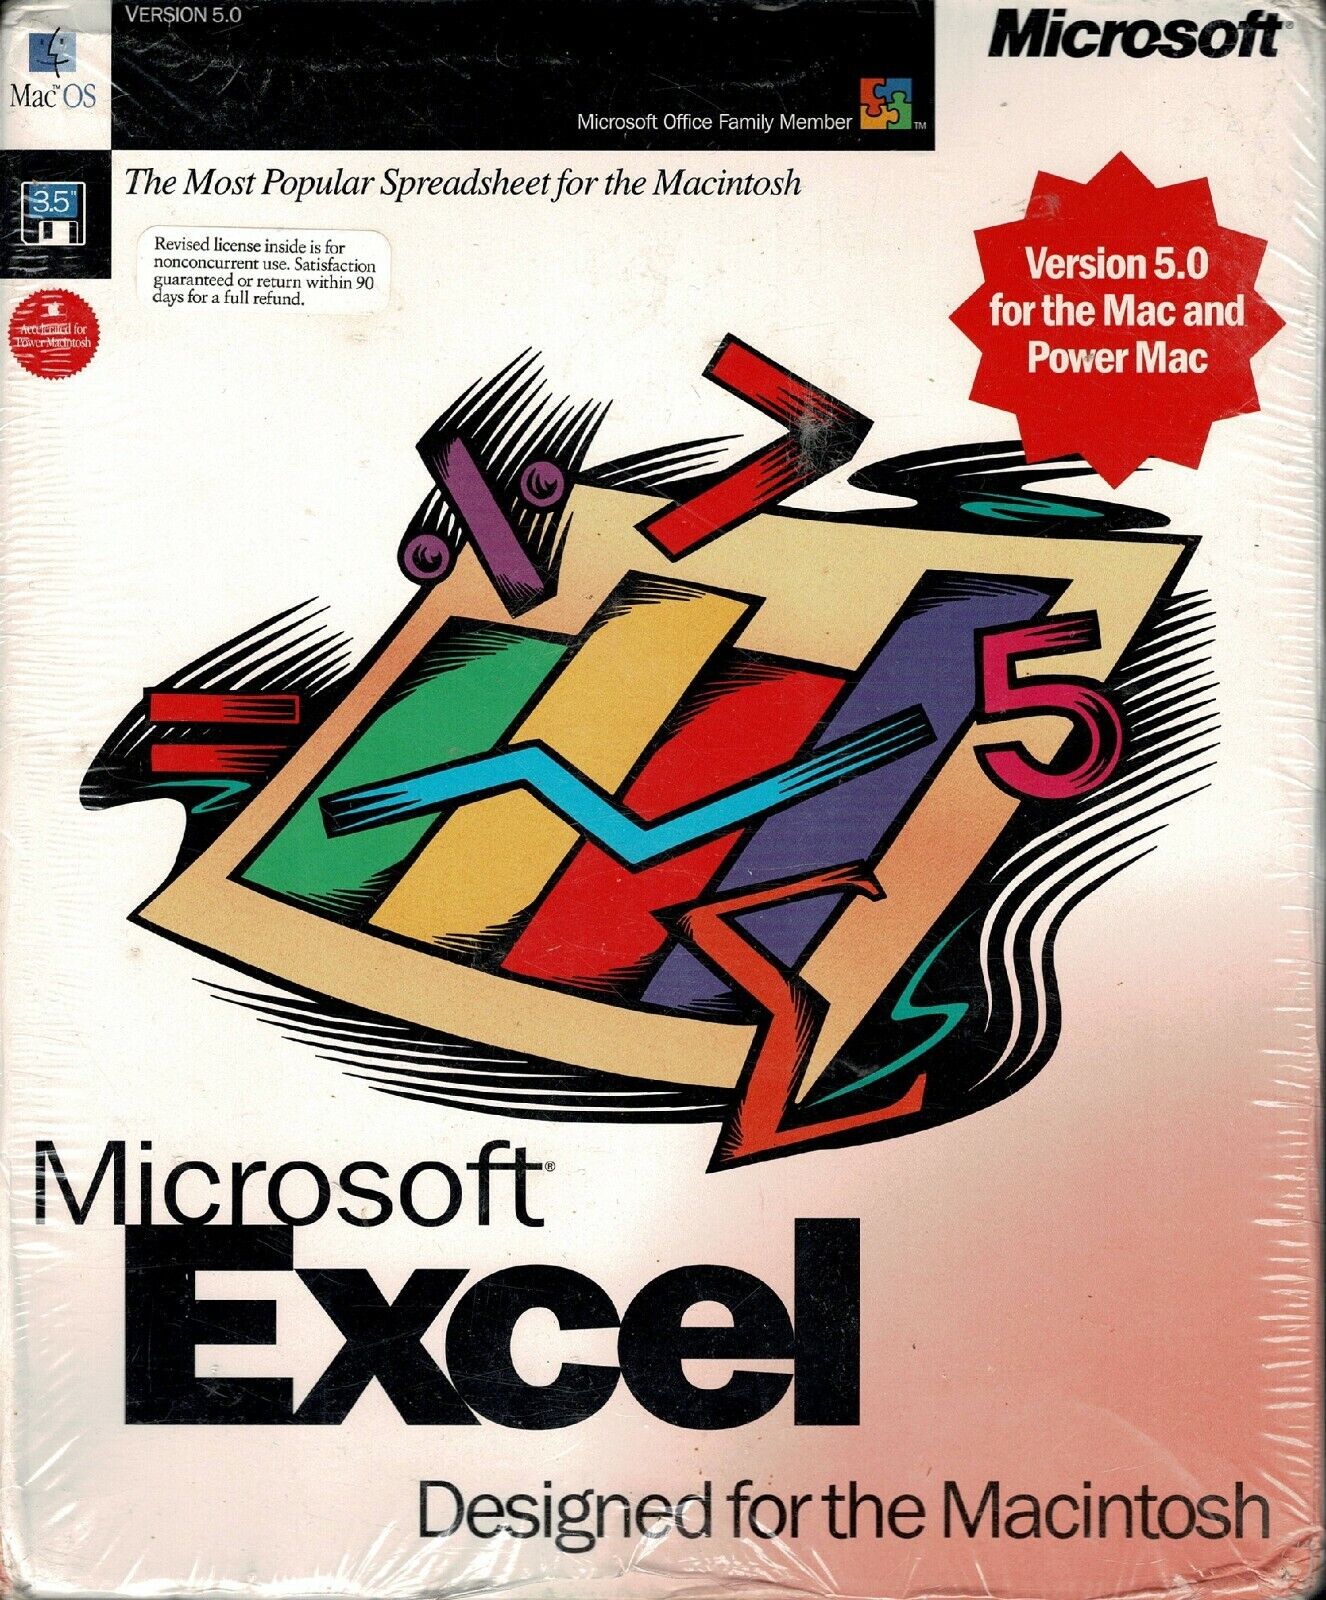 Microsoft Excel Version 5.0 For Mac and Power CIB 3.5